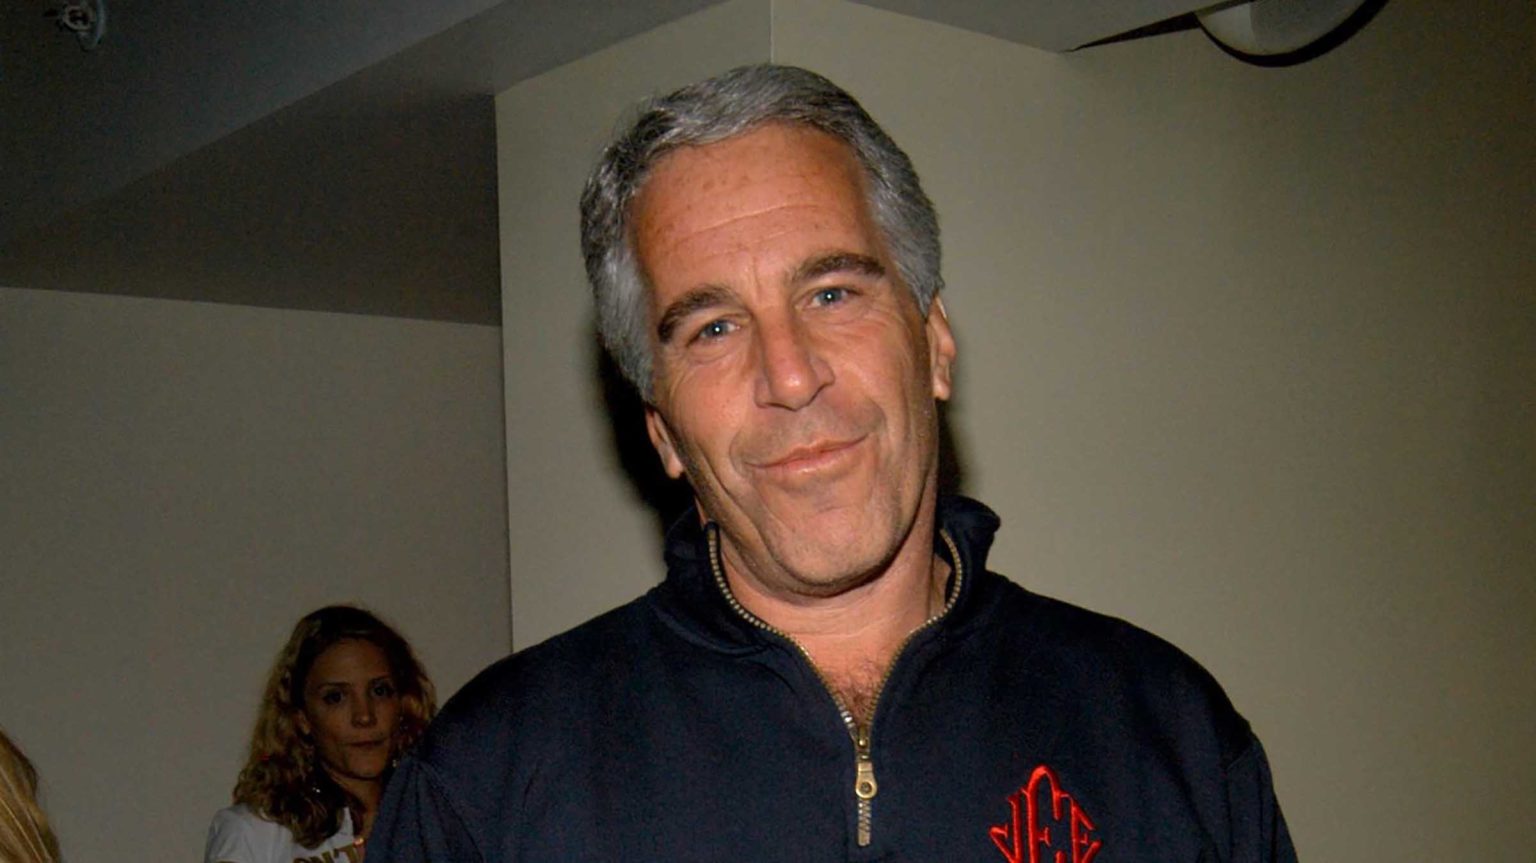 While awaiting his trial last year for charges of sex trafficking, Epstein turned up dead in his prison cell on August 10th. Was it suicide or homicide?